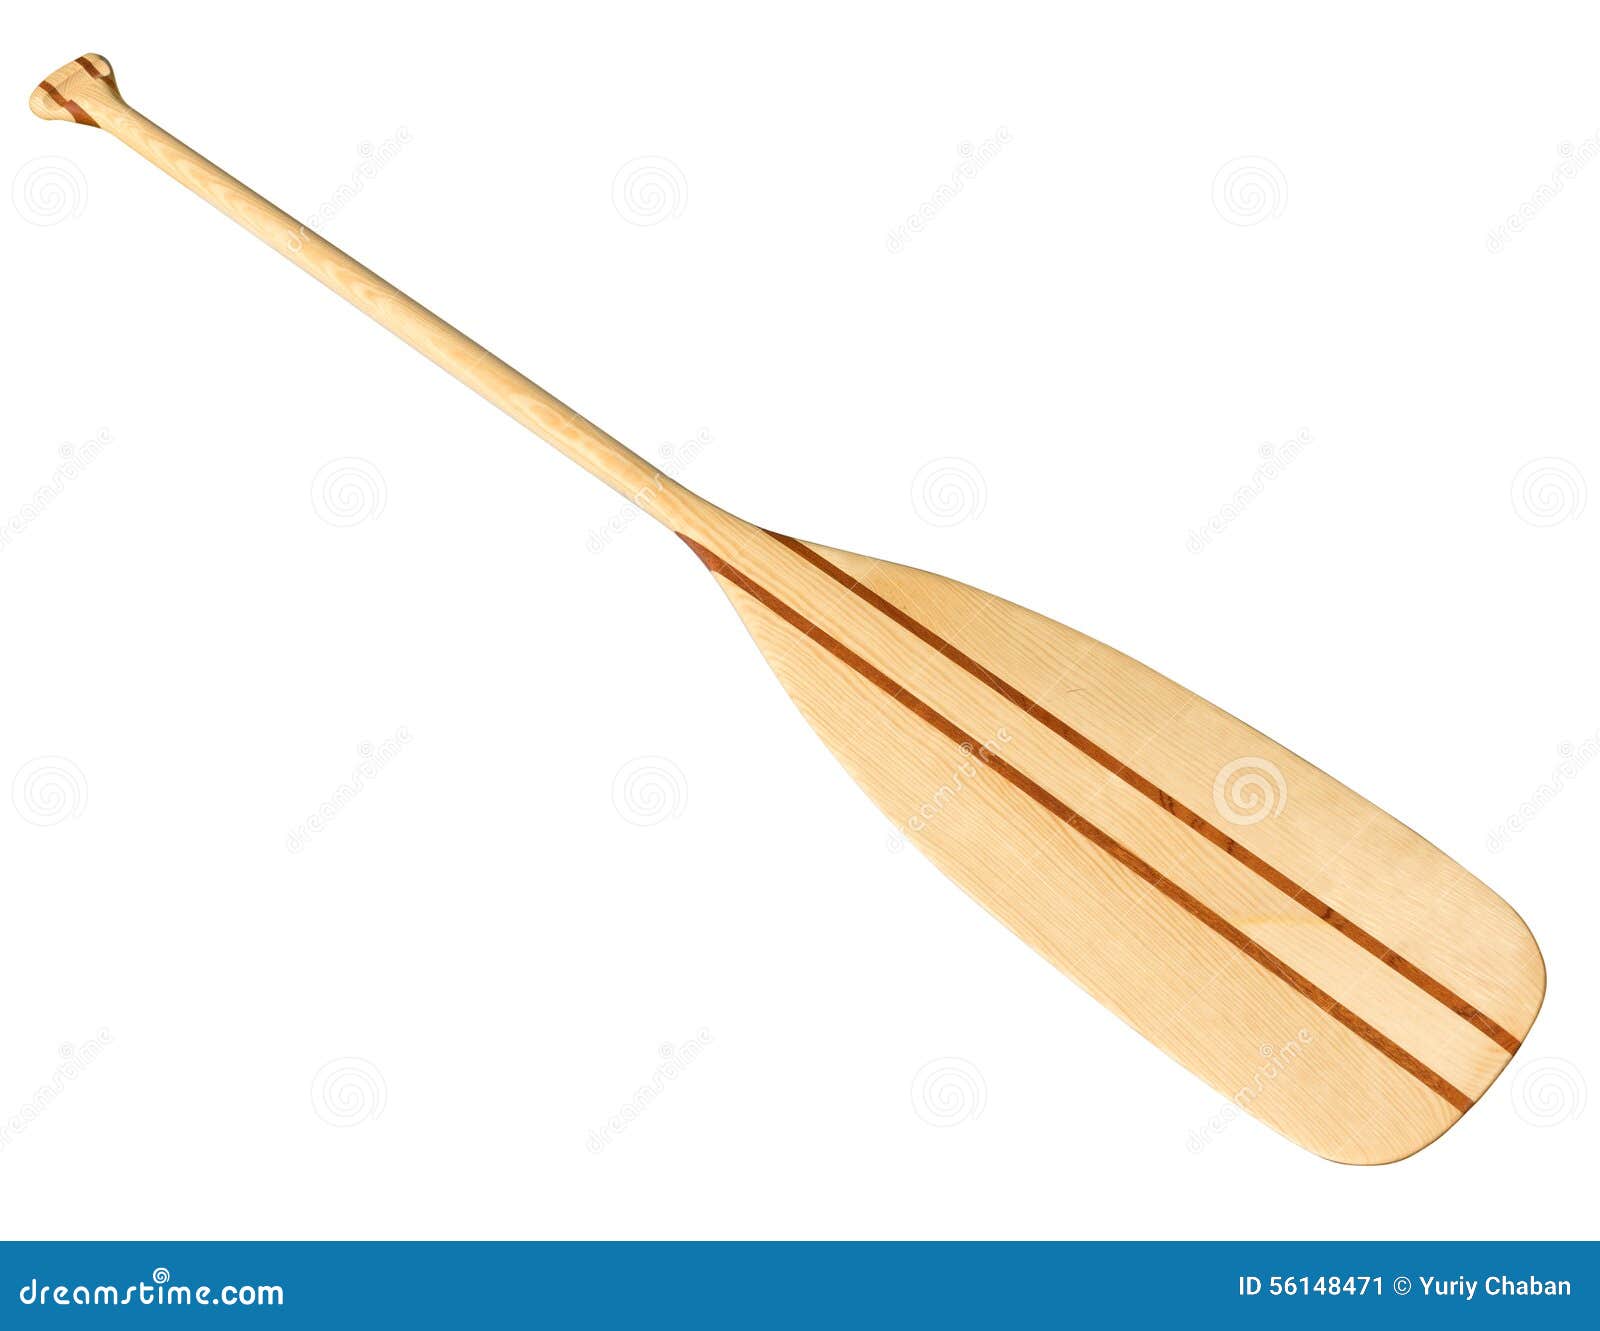 Canoe paddle iso   lated on white. Clipping path included.